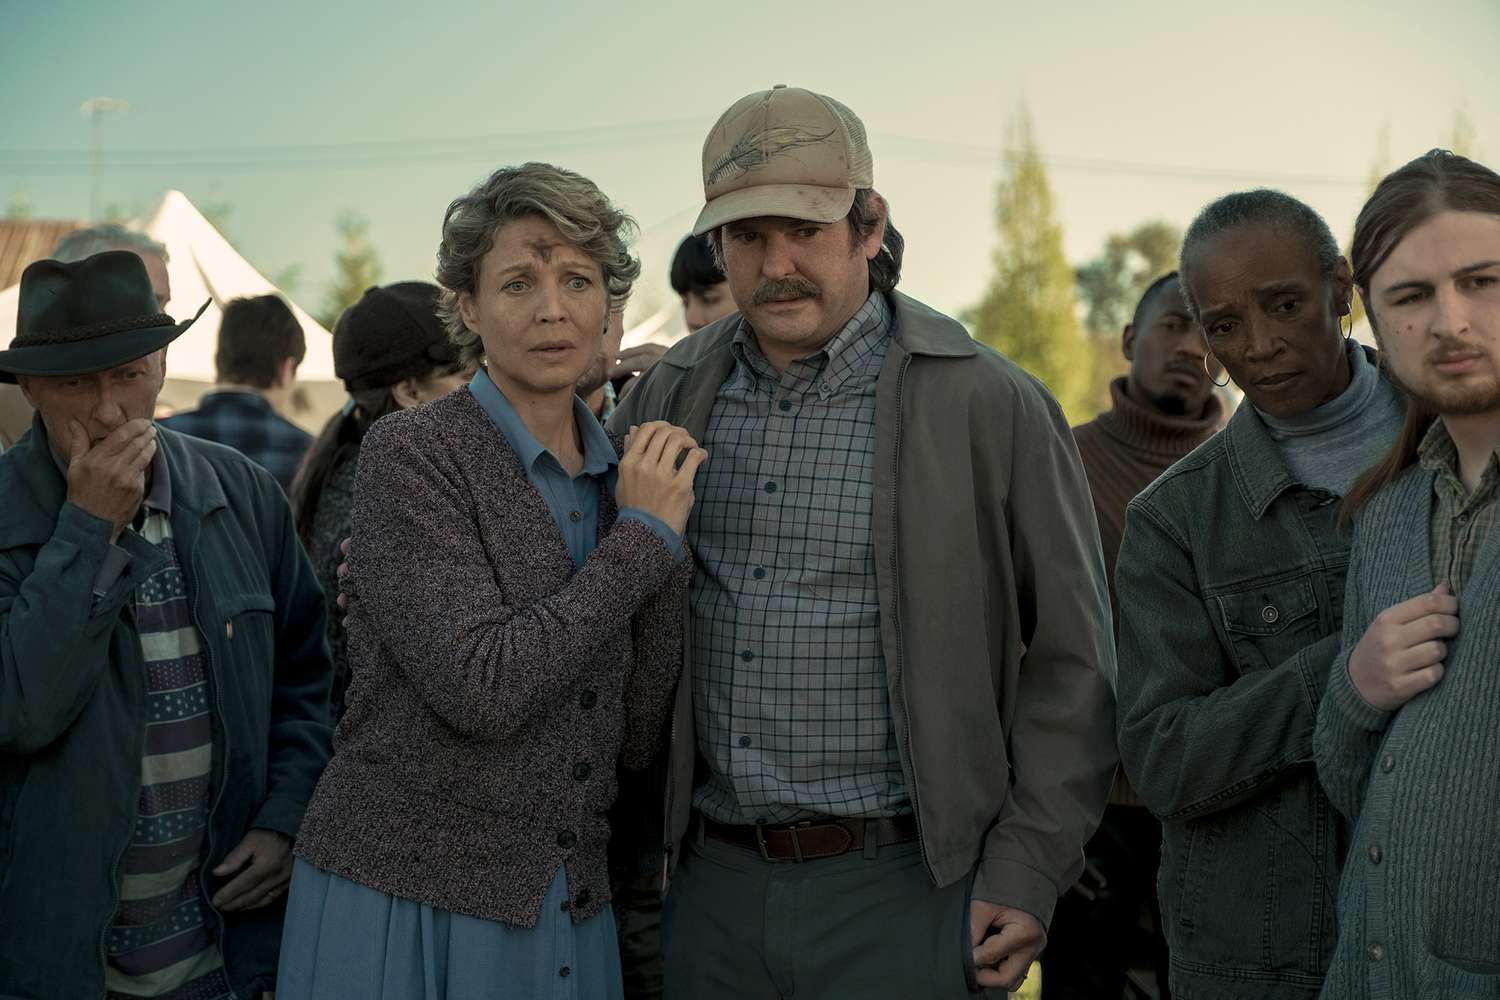 MIDNIGHT MASS (L to R) KRISTIN LEHMAN as ANNIE FLYNN and HENRY THOMAS as ED FLYNN in episode 102 of MIDNIGHT MASS